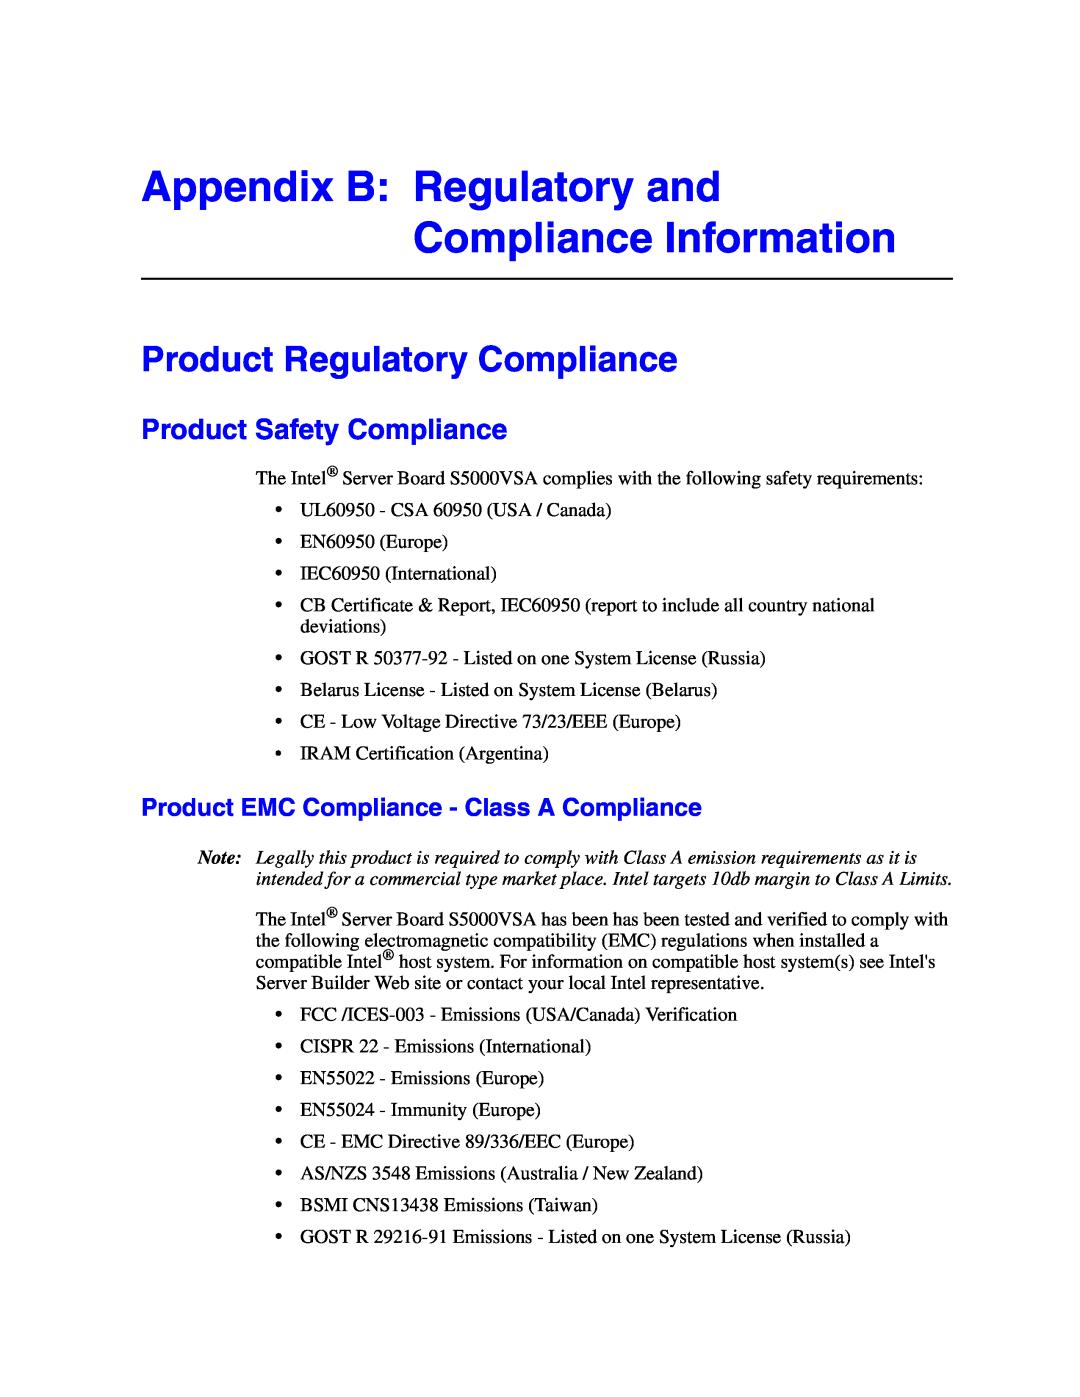 Intel S5000VSA Appendix B Regulatory and Compliance Information, Product Regulatory Compliance, Product Safety Compliance 